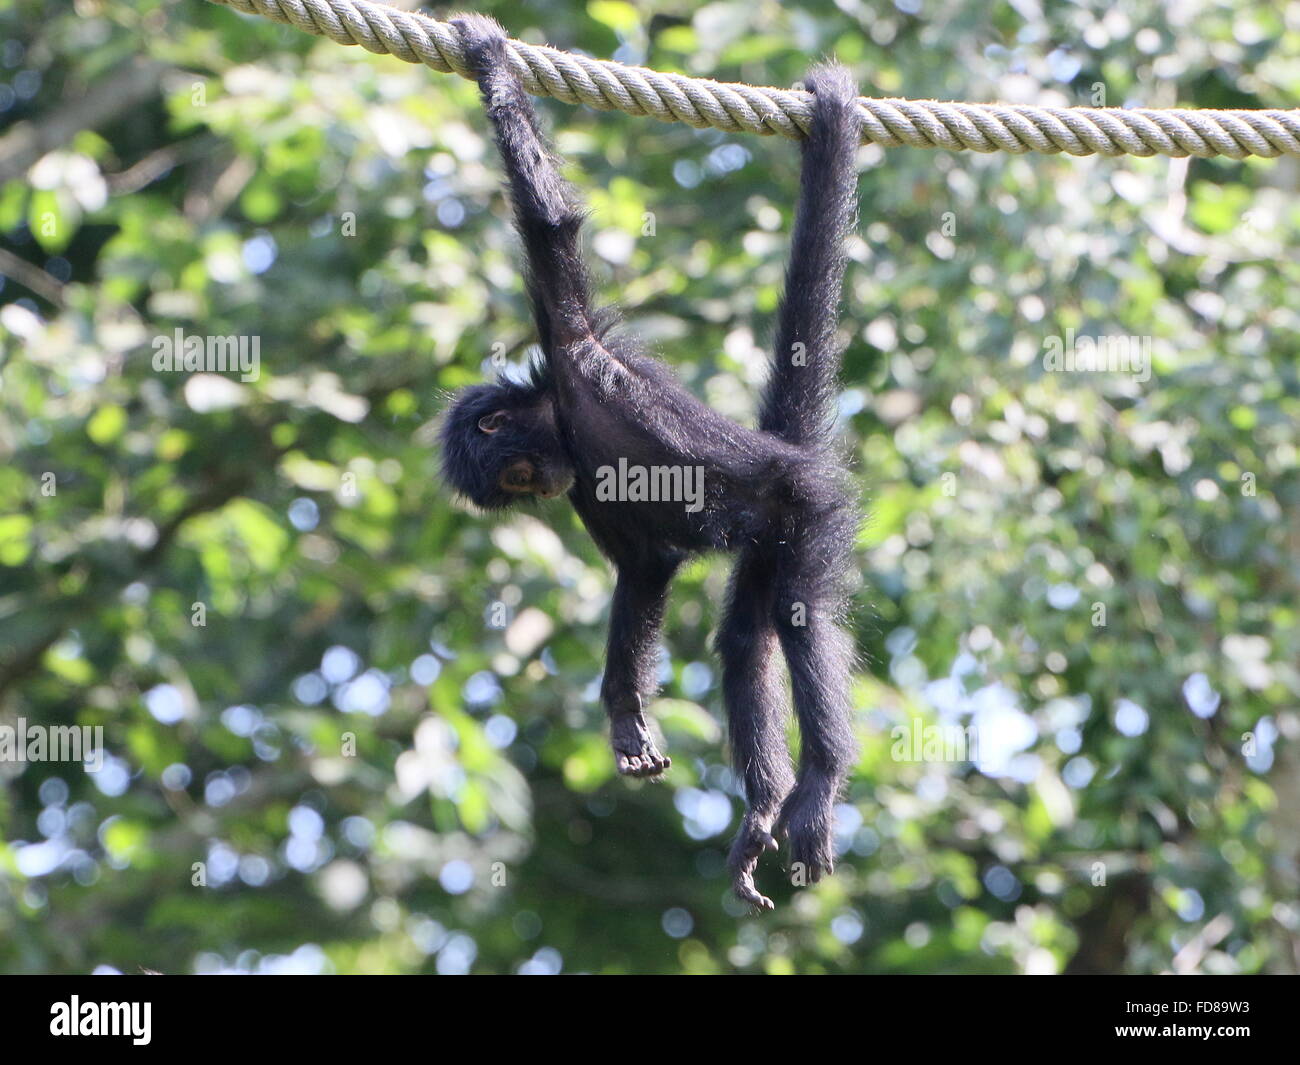 Juvenile Colombian Black-headed spider monkey (Ateles fusciceps Robustus) using prehensile tail, hanging from a rope at a zoo Stock Photo